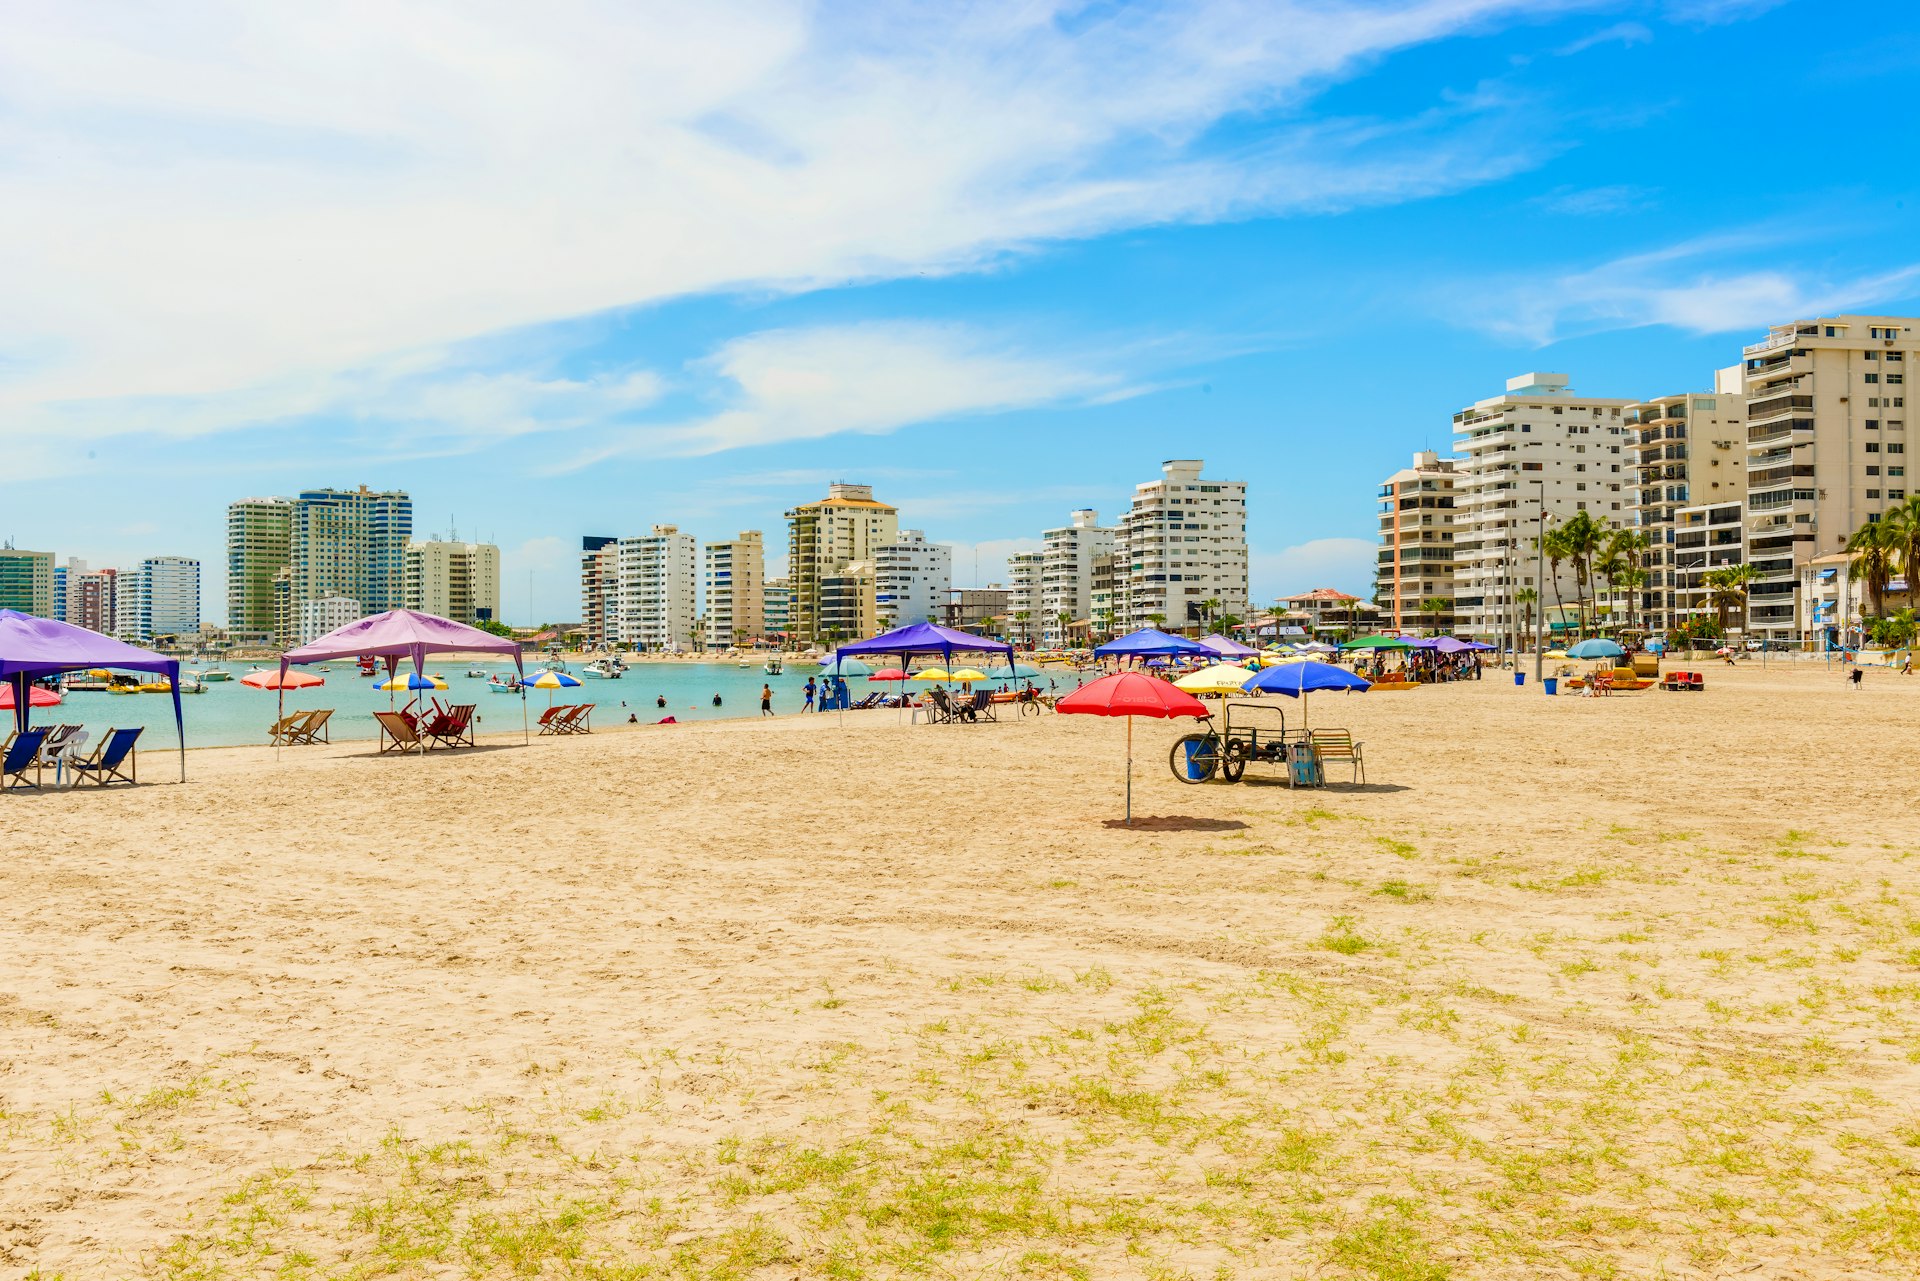 A city beach backed by apartment blocks and with many loungers and seats under gazebos